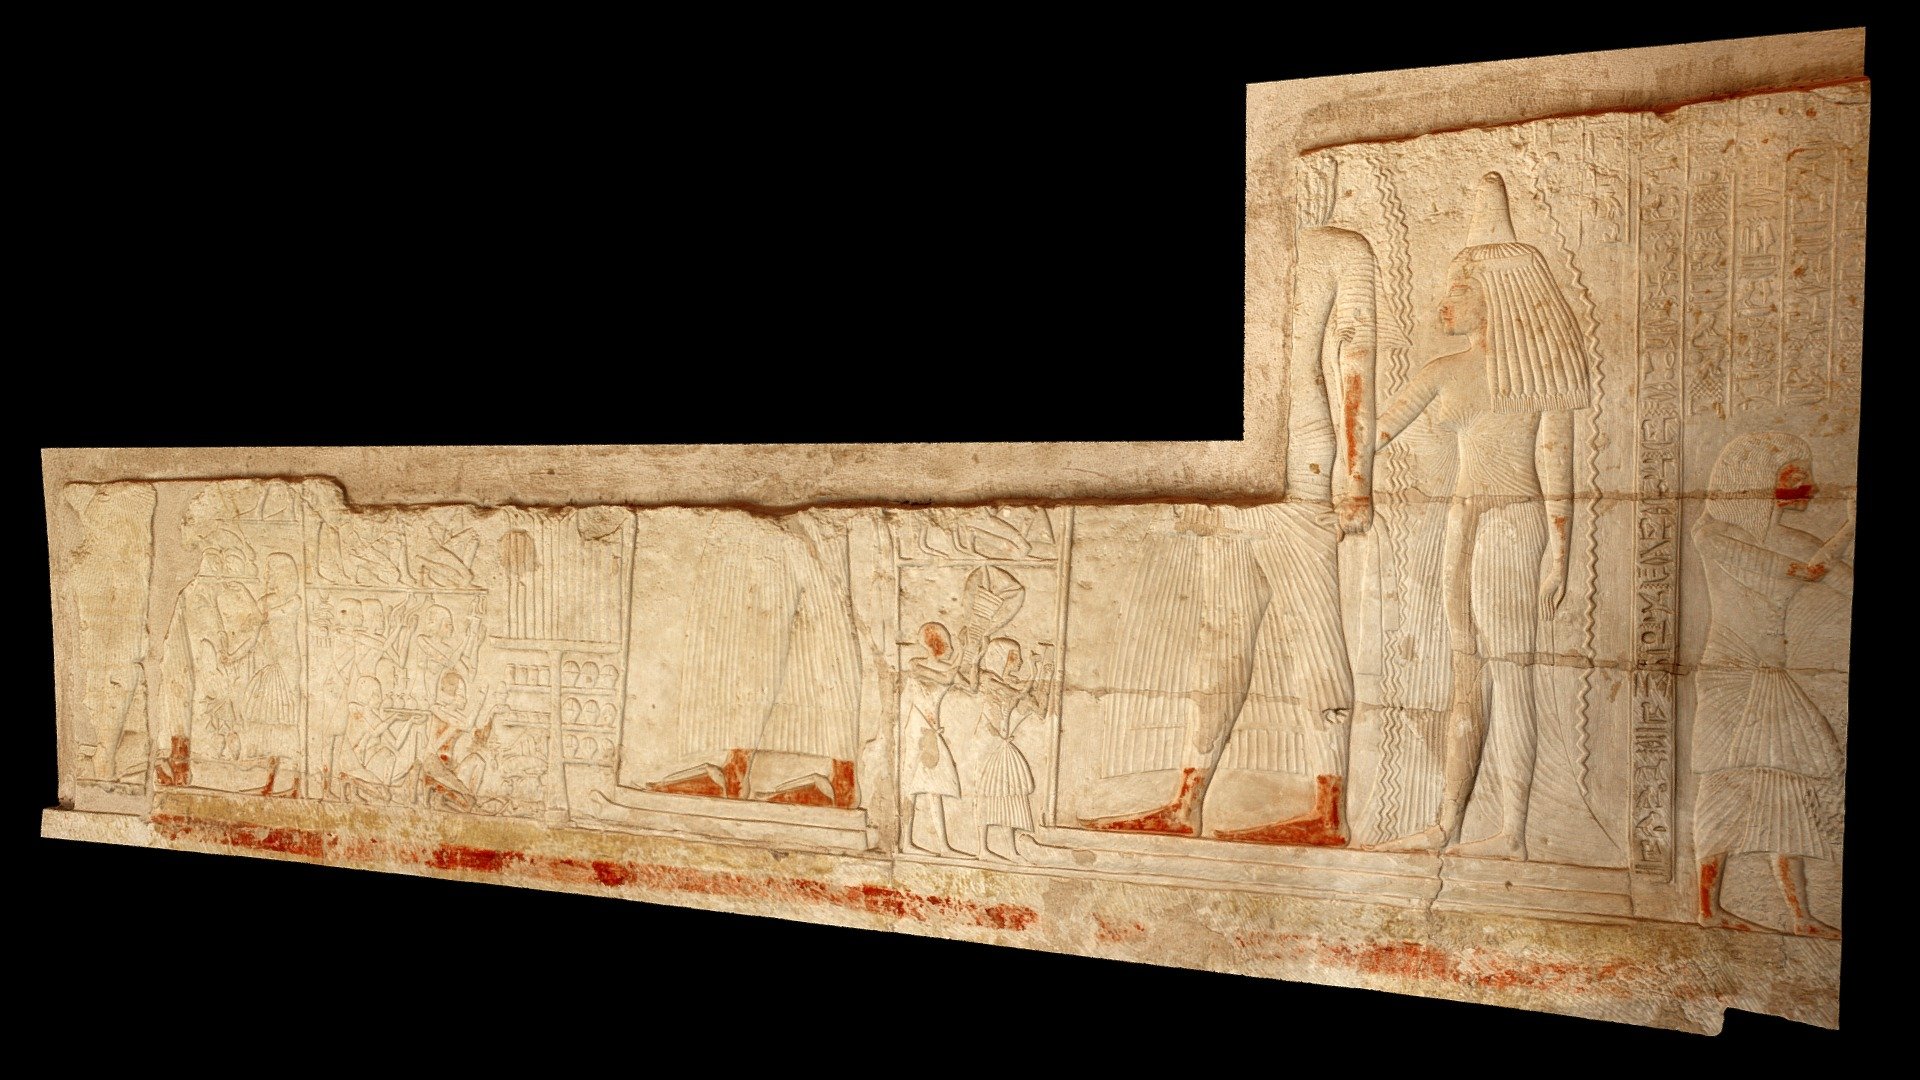 Limestone relief scene showing Meryneith and Iunia from the tomb of Meryneith at Saqqara, Egypt.

Created from 58 photographs (Canon EOS Rebel T5i) using Metashape 1.5.4 3d model